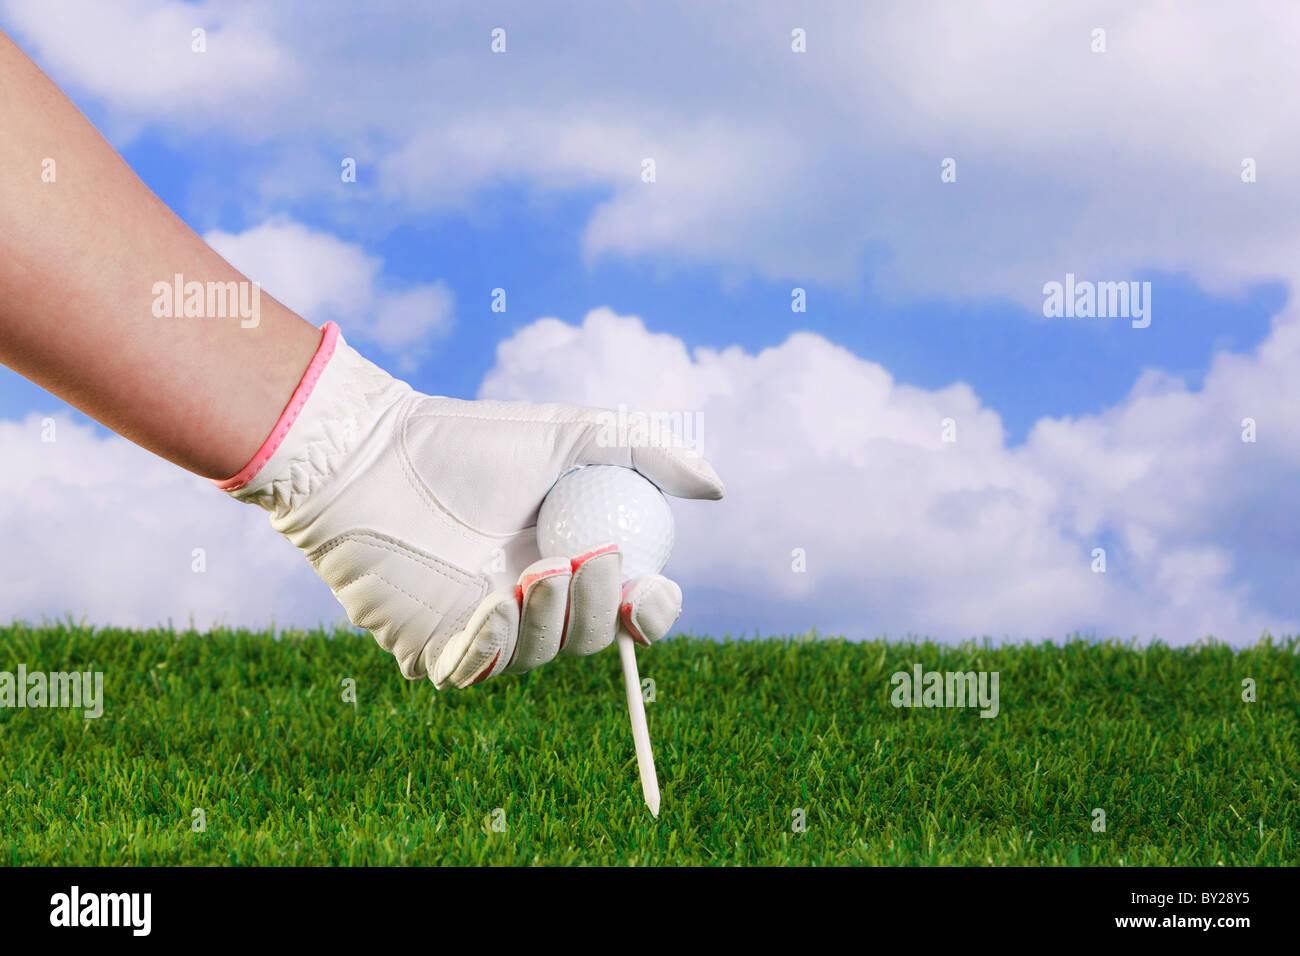 Photo of a ladies hand in white and pink glove placing a golf ball and tee into grass. Stock Photo